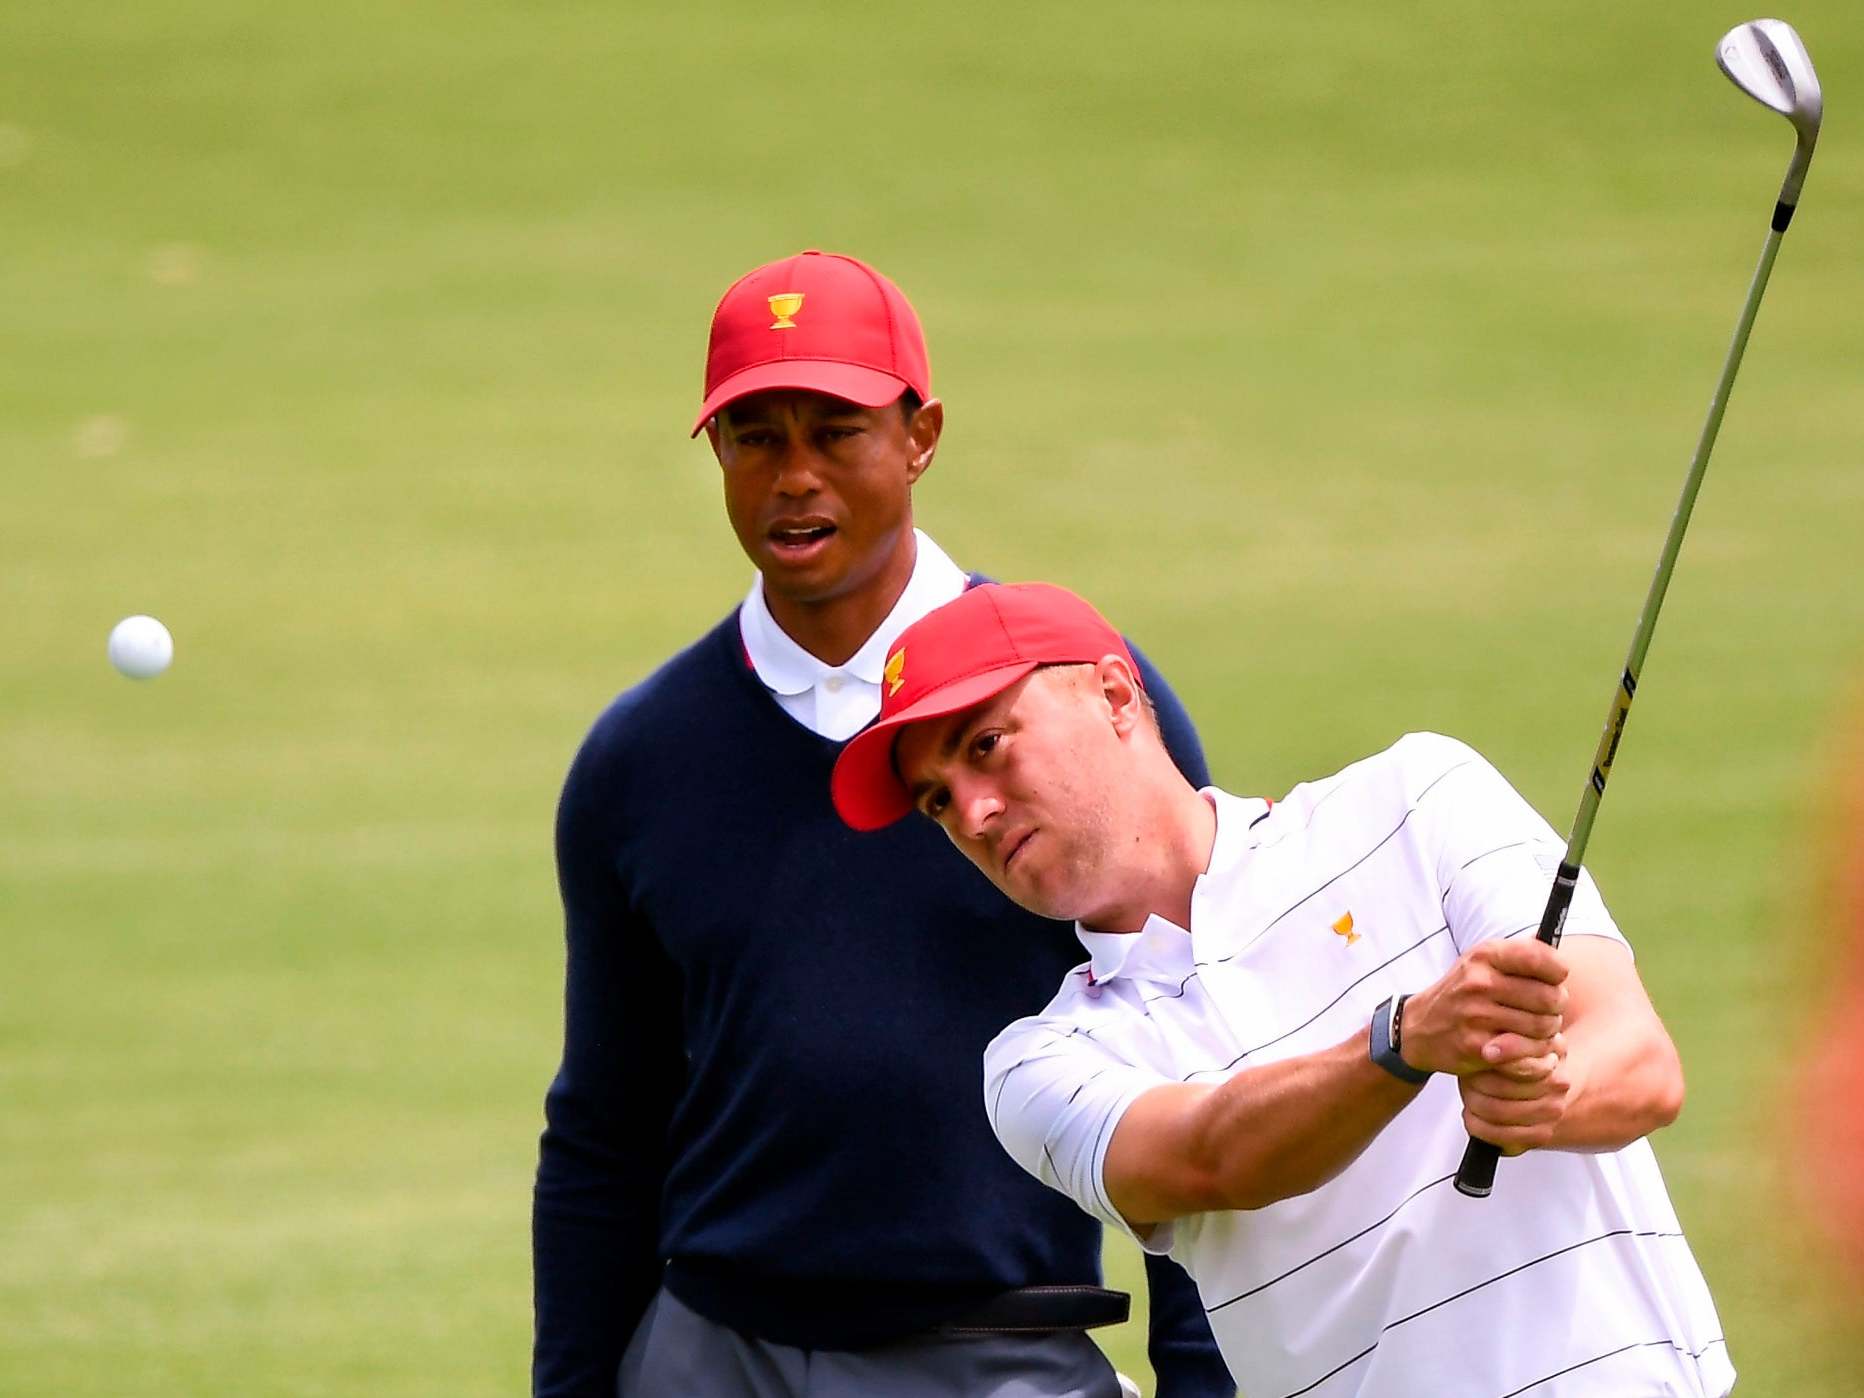 Tiger Woods and Justin Thomas will team up to open the Presidents Cup